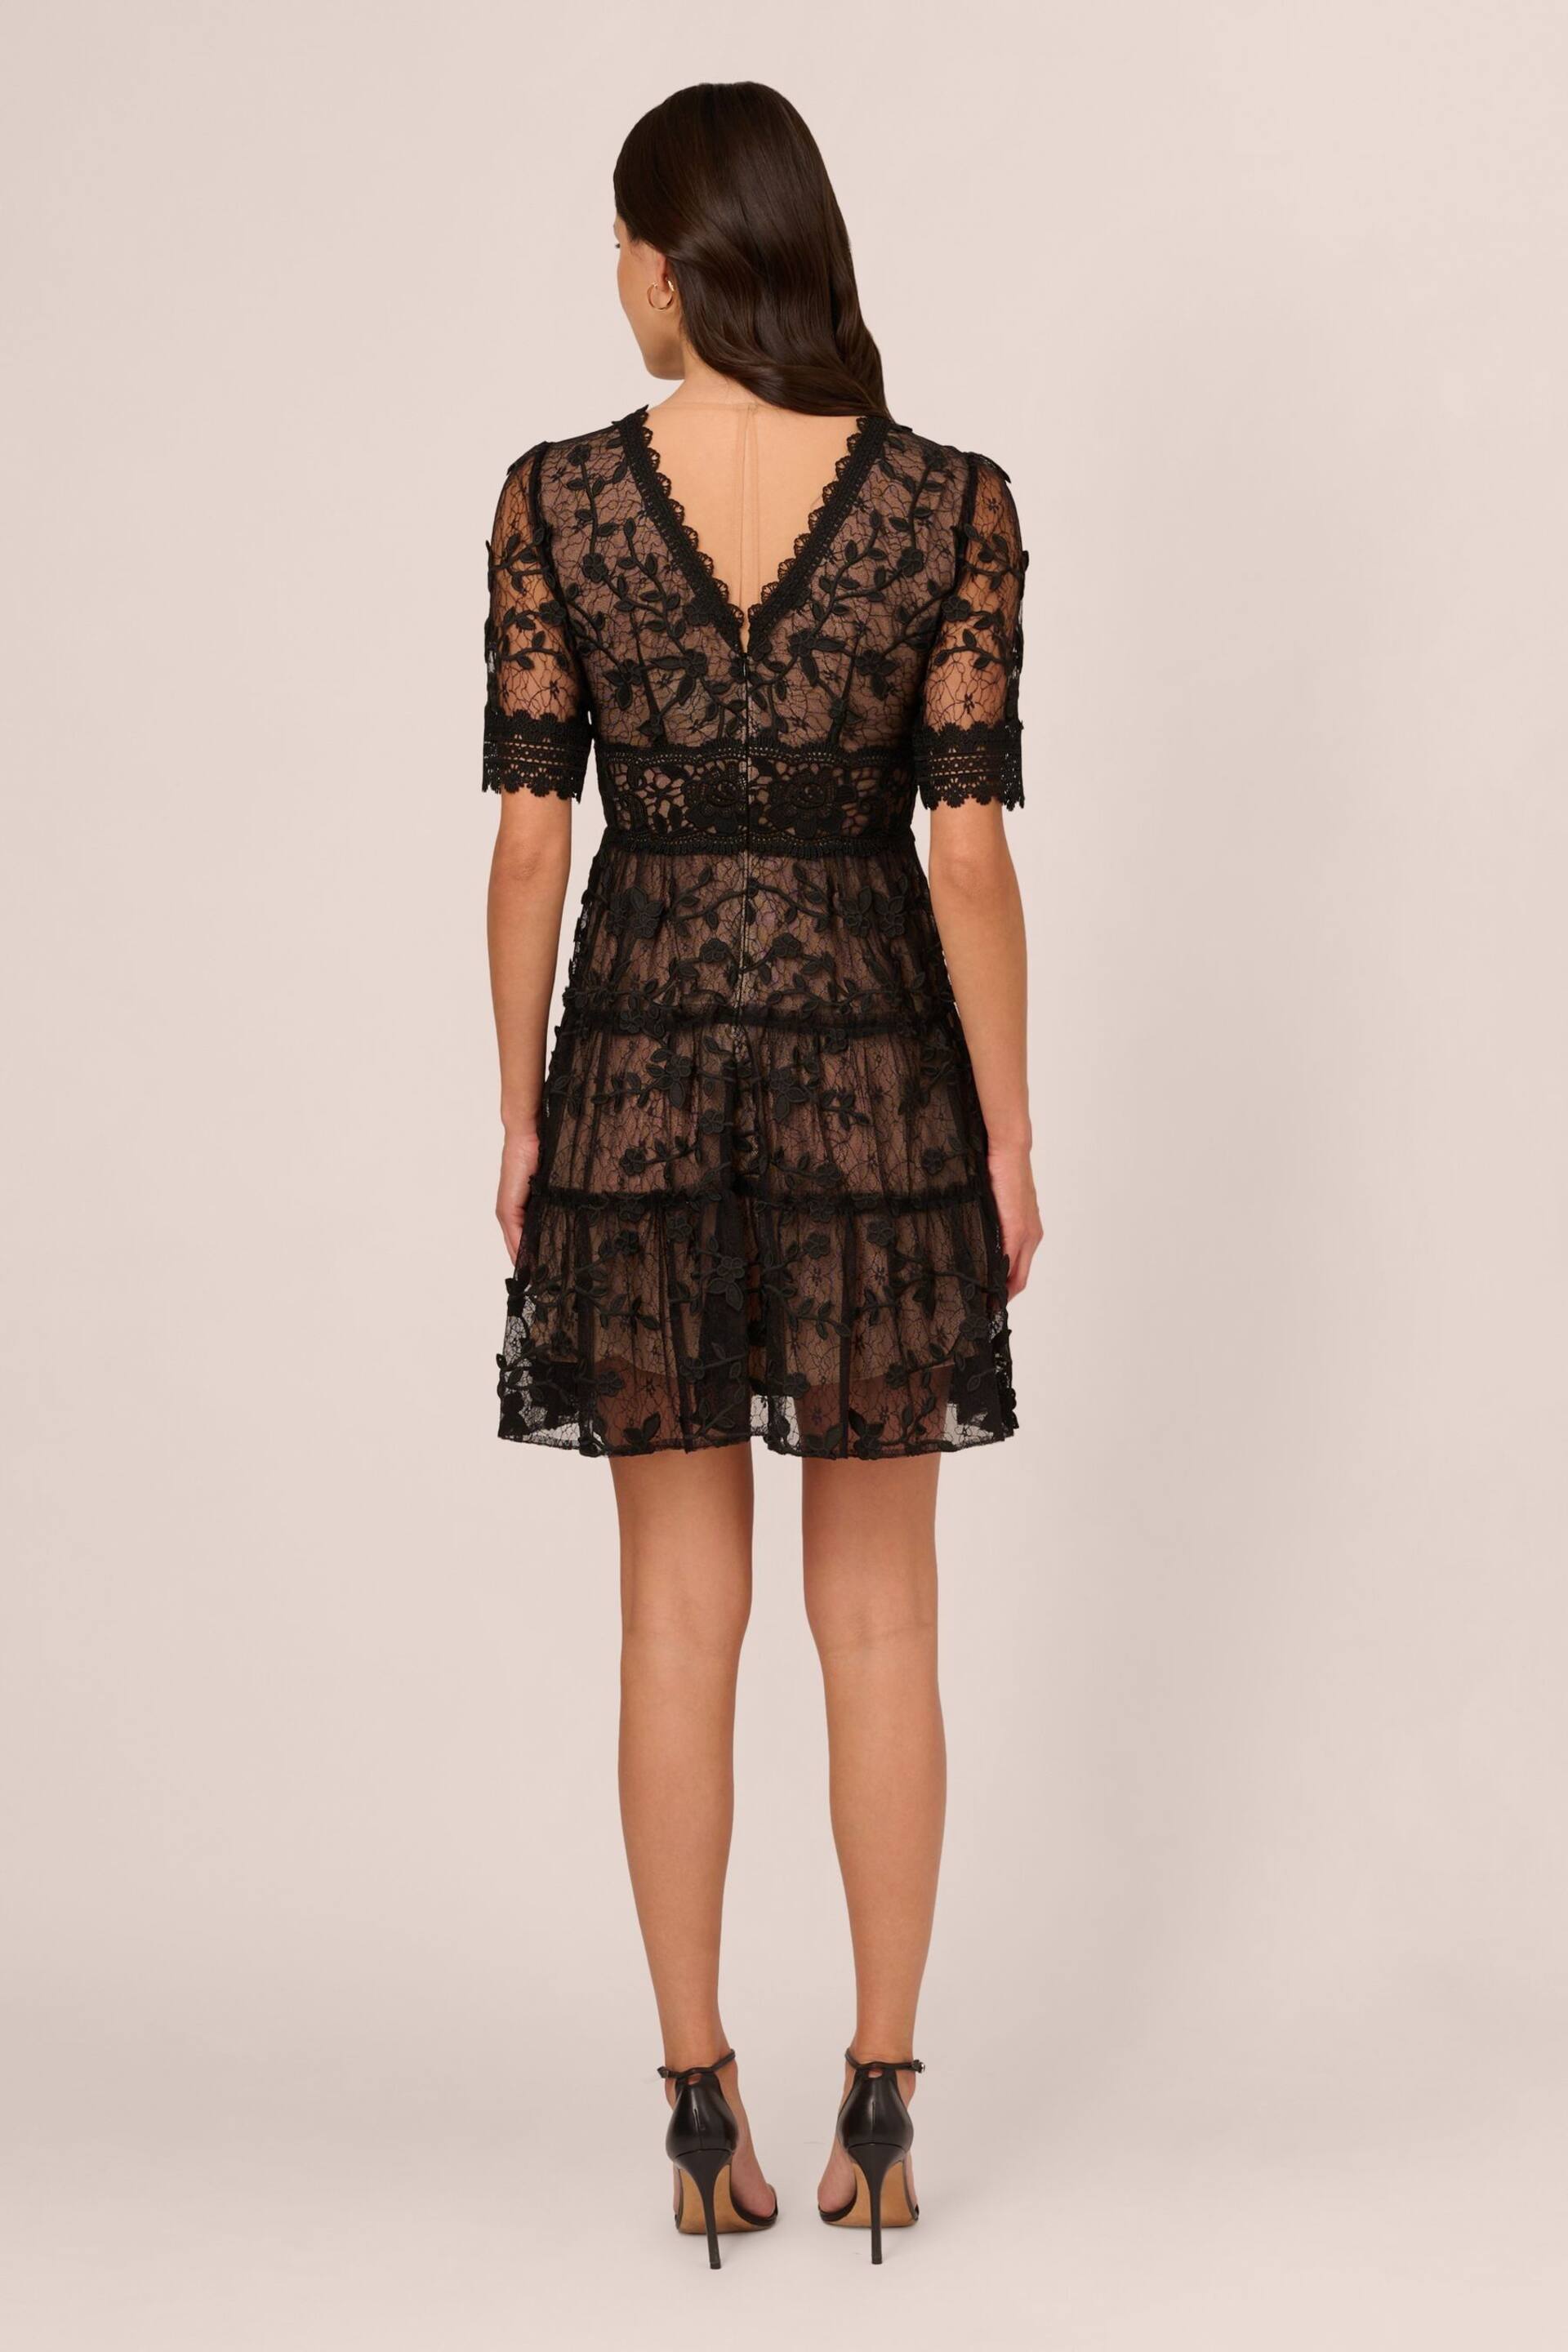 Adrianna Papell Lace Embroidery Black Dress - Image 2 of 8